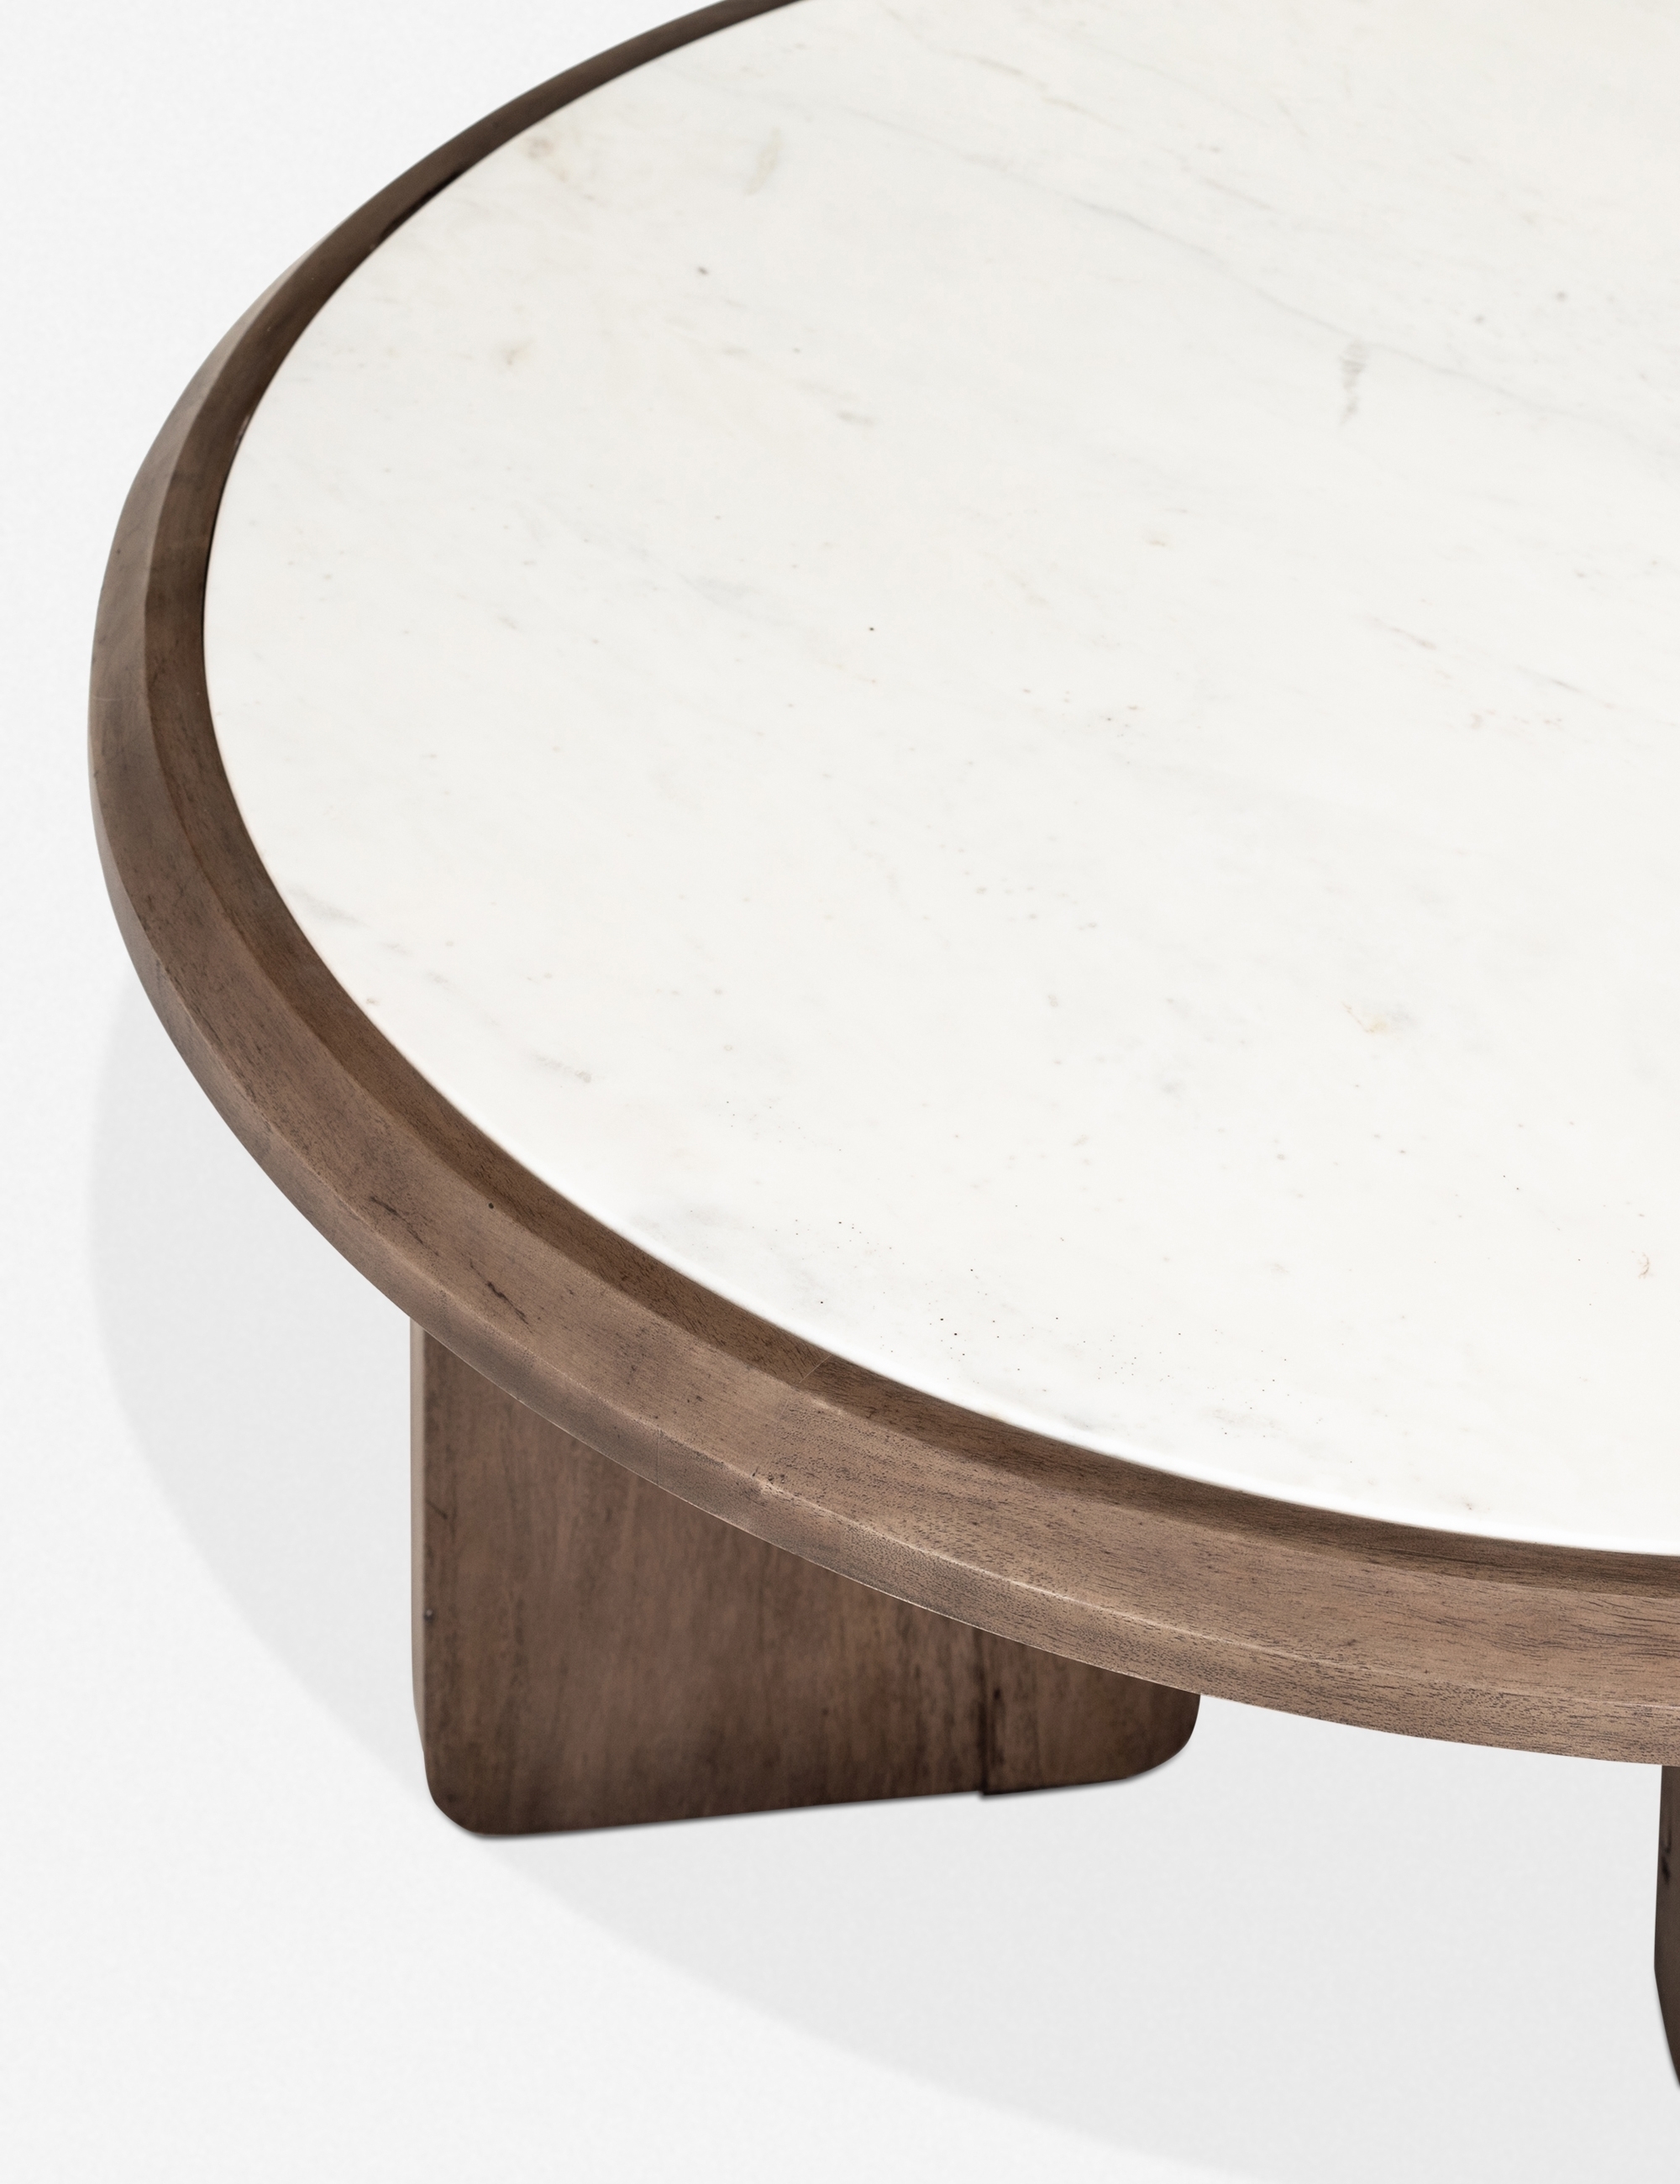 Lido Round Coffee Table - Image 2